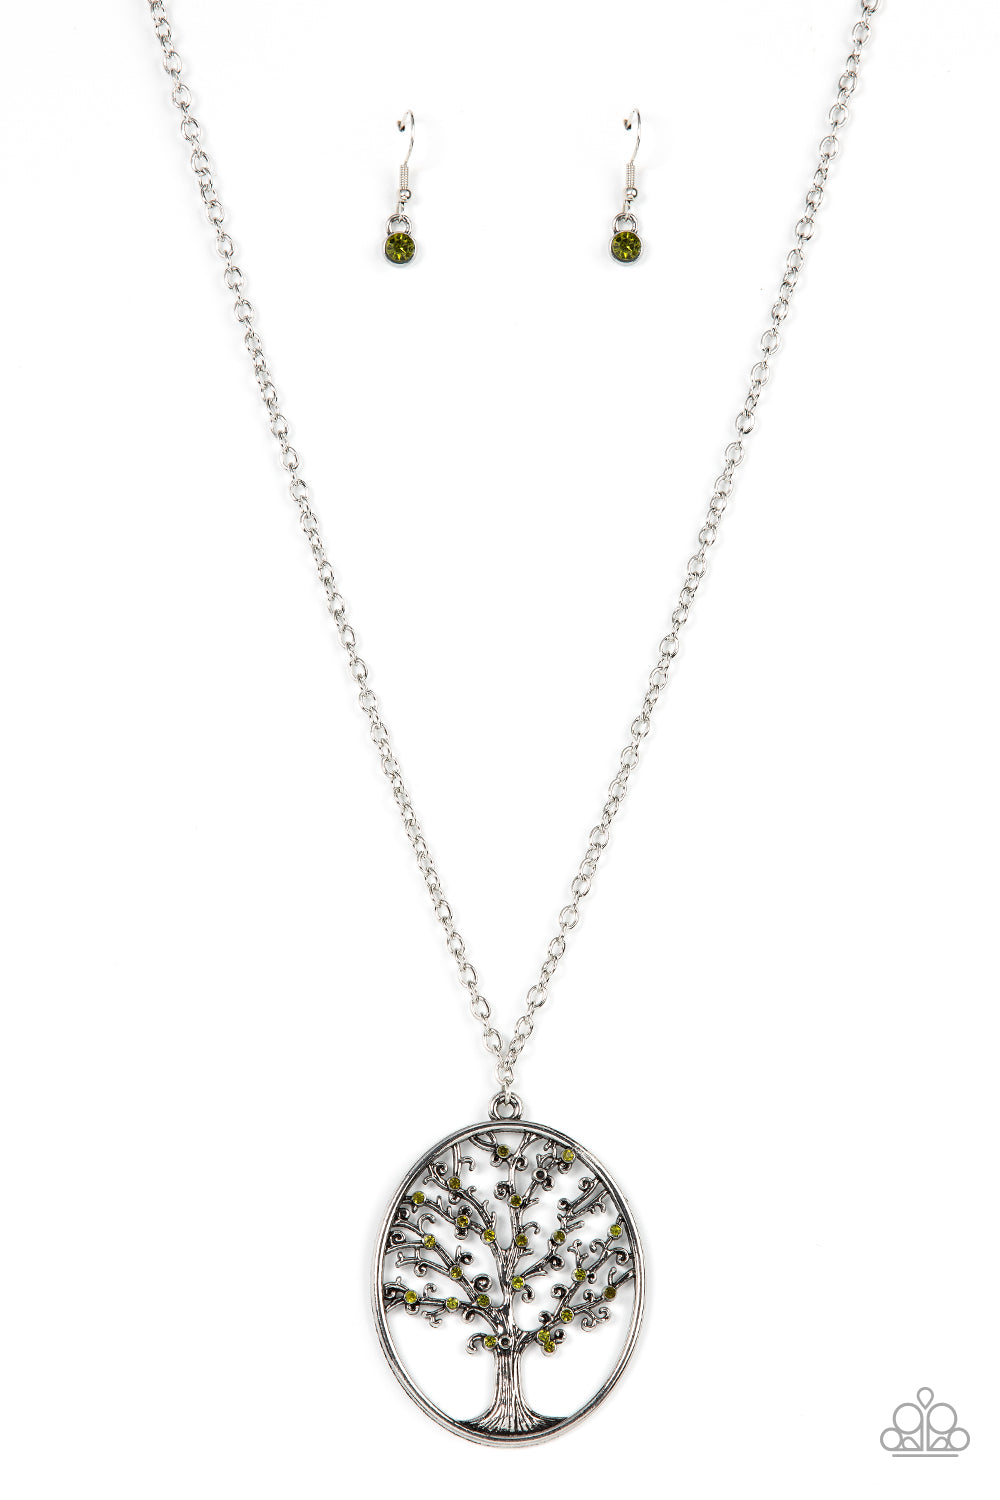 Autumn Abundance Green Necklace - Paparazzi Accessories  Dainty green rhinestones are sprinkled across the top of a silver tree beautifully branching inside an oval silver frame, resulting in a seasonal pendant at the bottom of an extended silver chain. Features an adjustable clasp closure.  Sold as one individual necklace. Includes one pair of matching earrings.